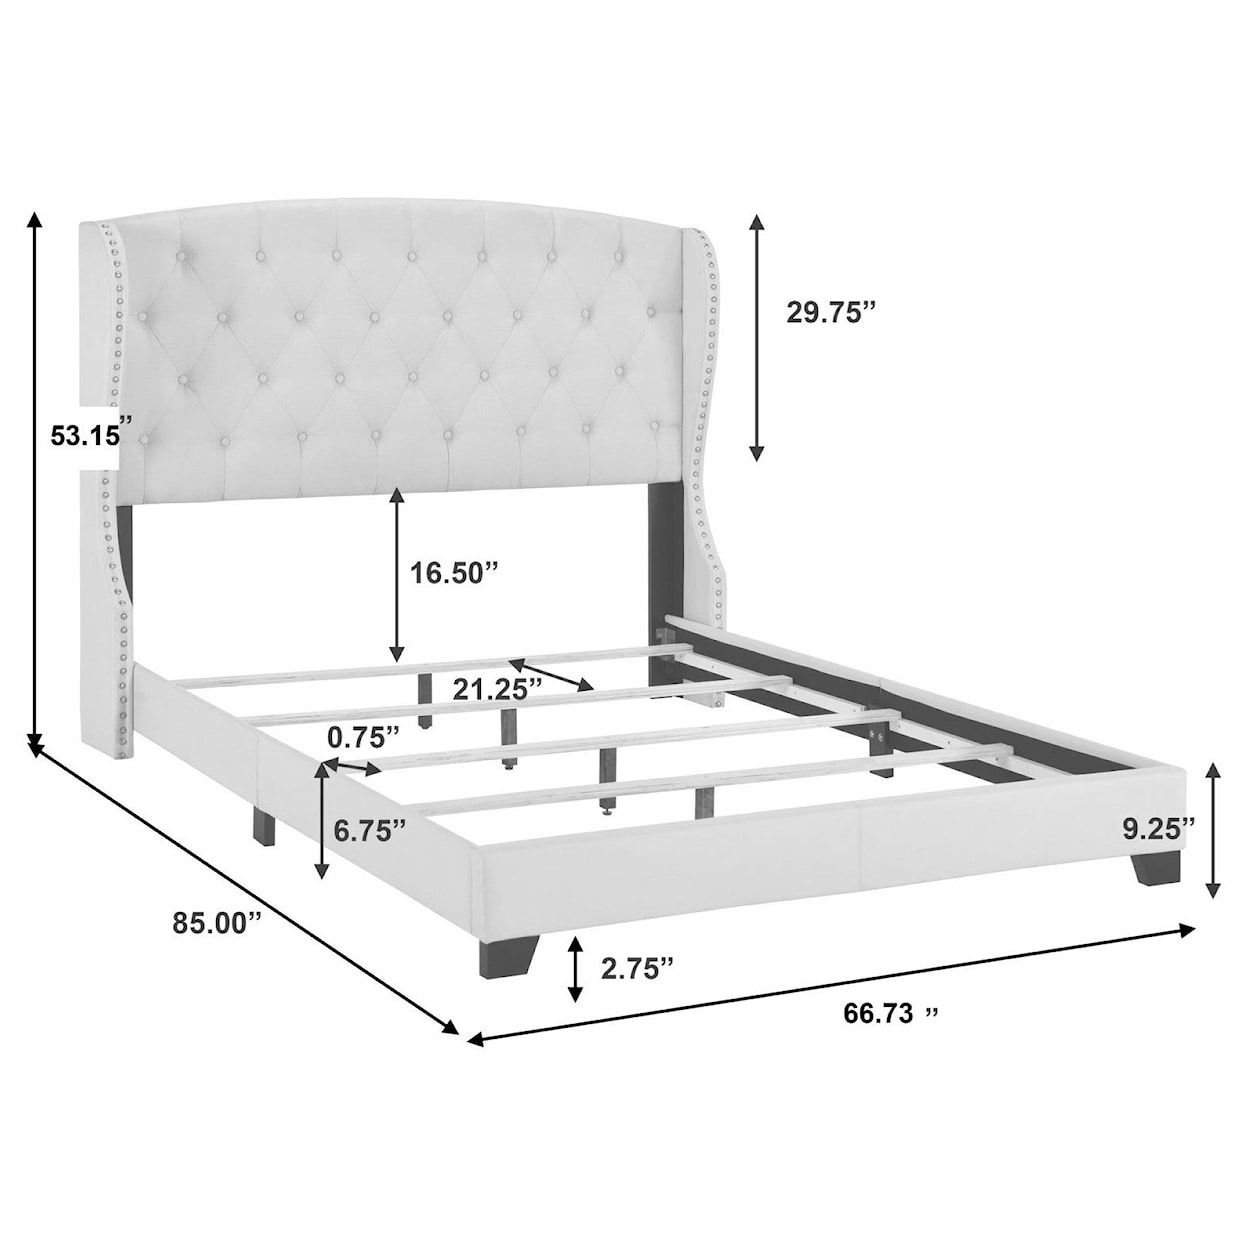 The Monday Company Upholstered Bedroom Queen Tufted Wing Bed